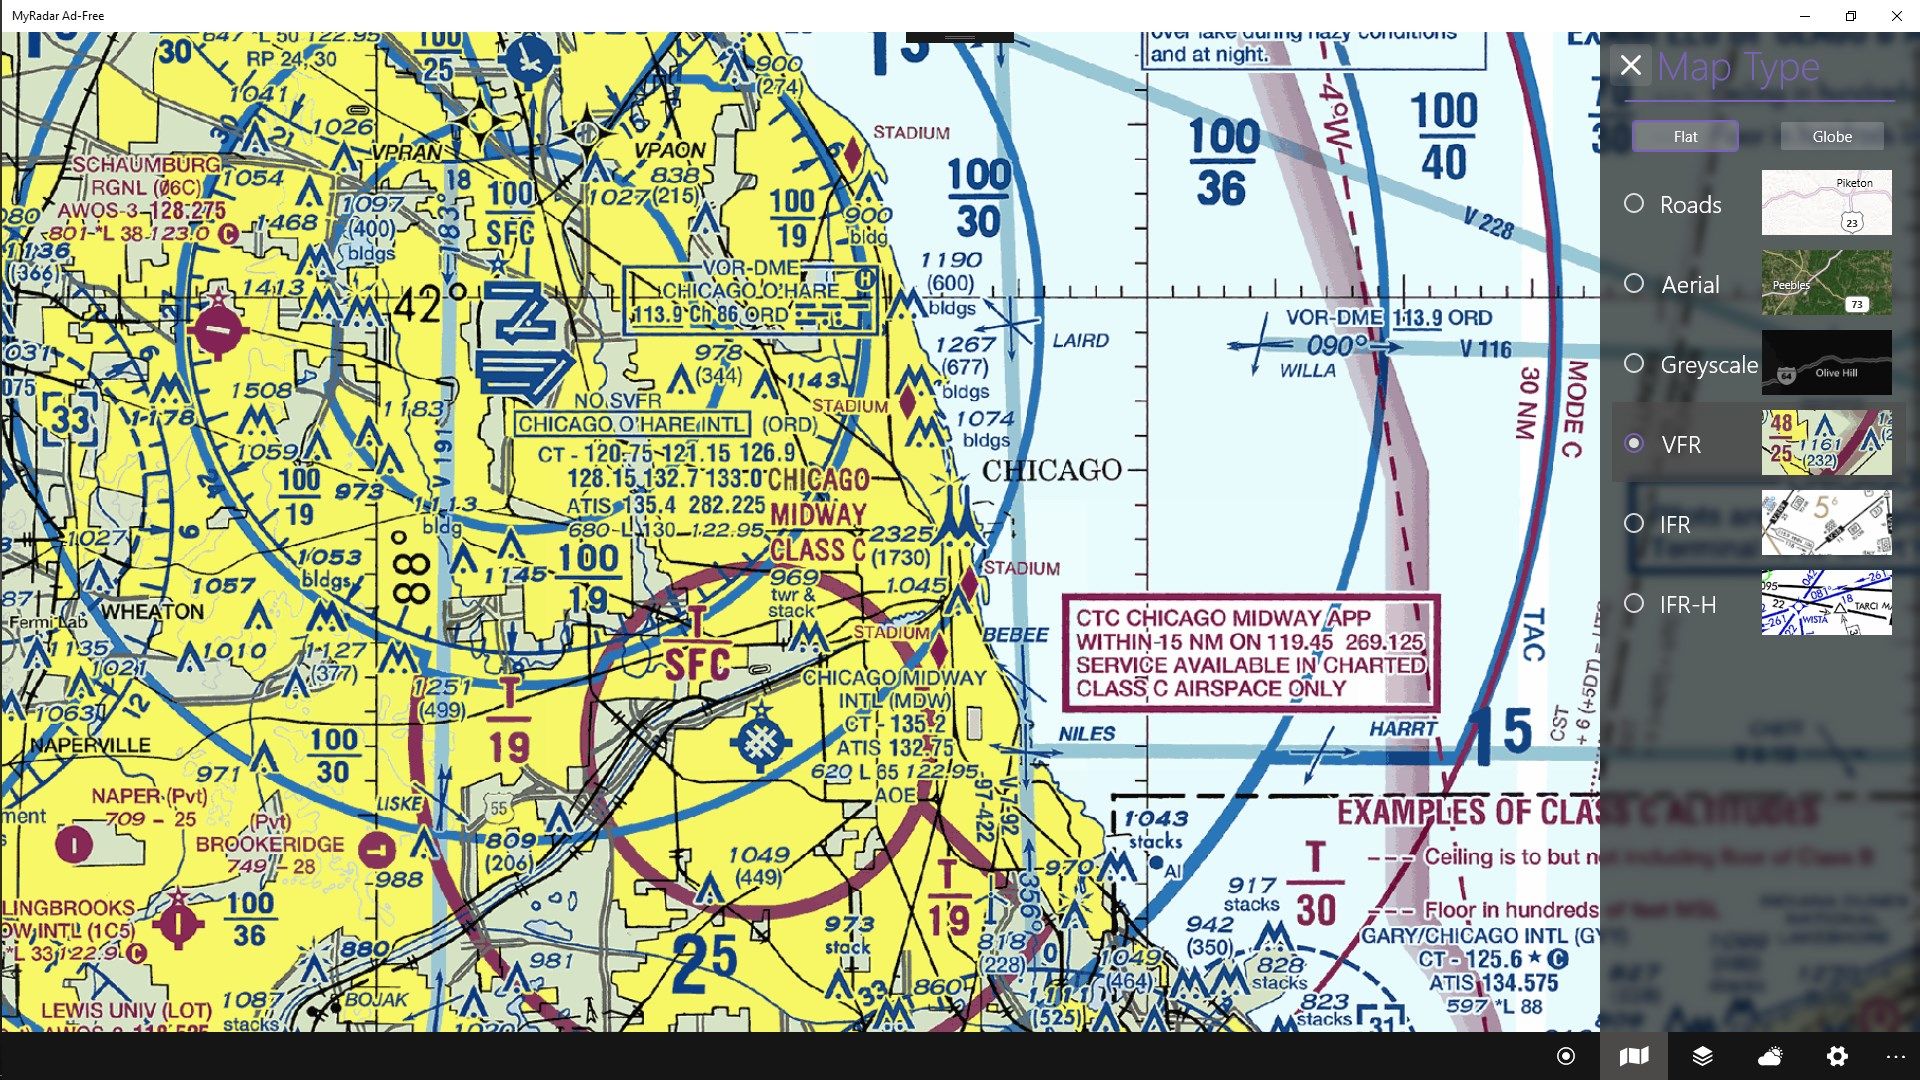 An optional aviation map type upgrade will display VFR, IFR, and IFR-H charts for aviation enthusiasts.